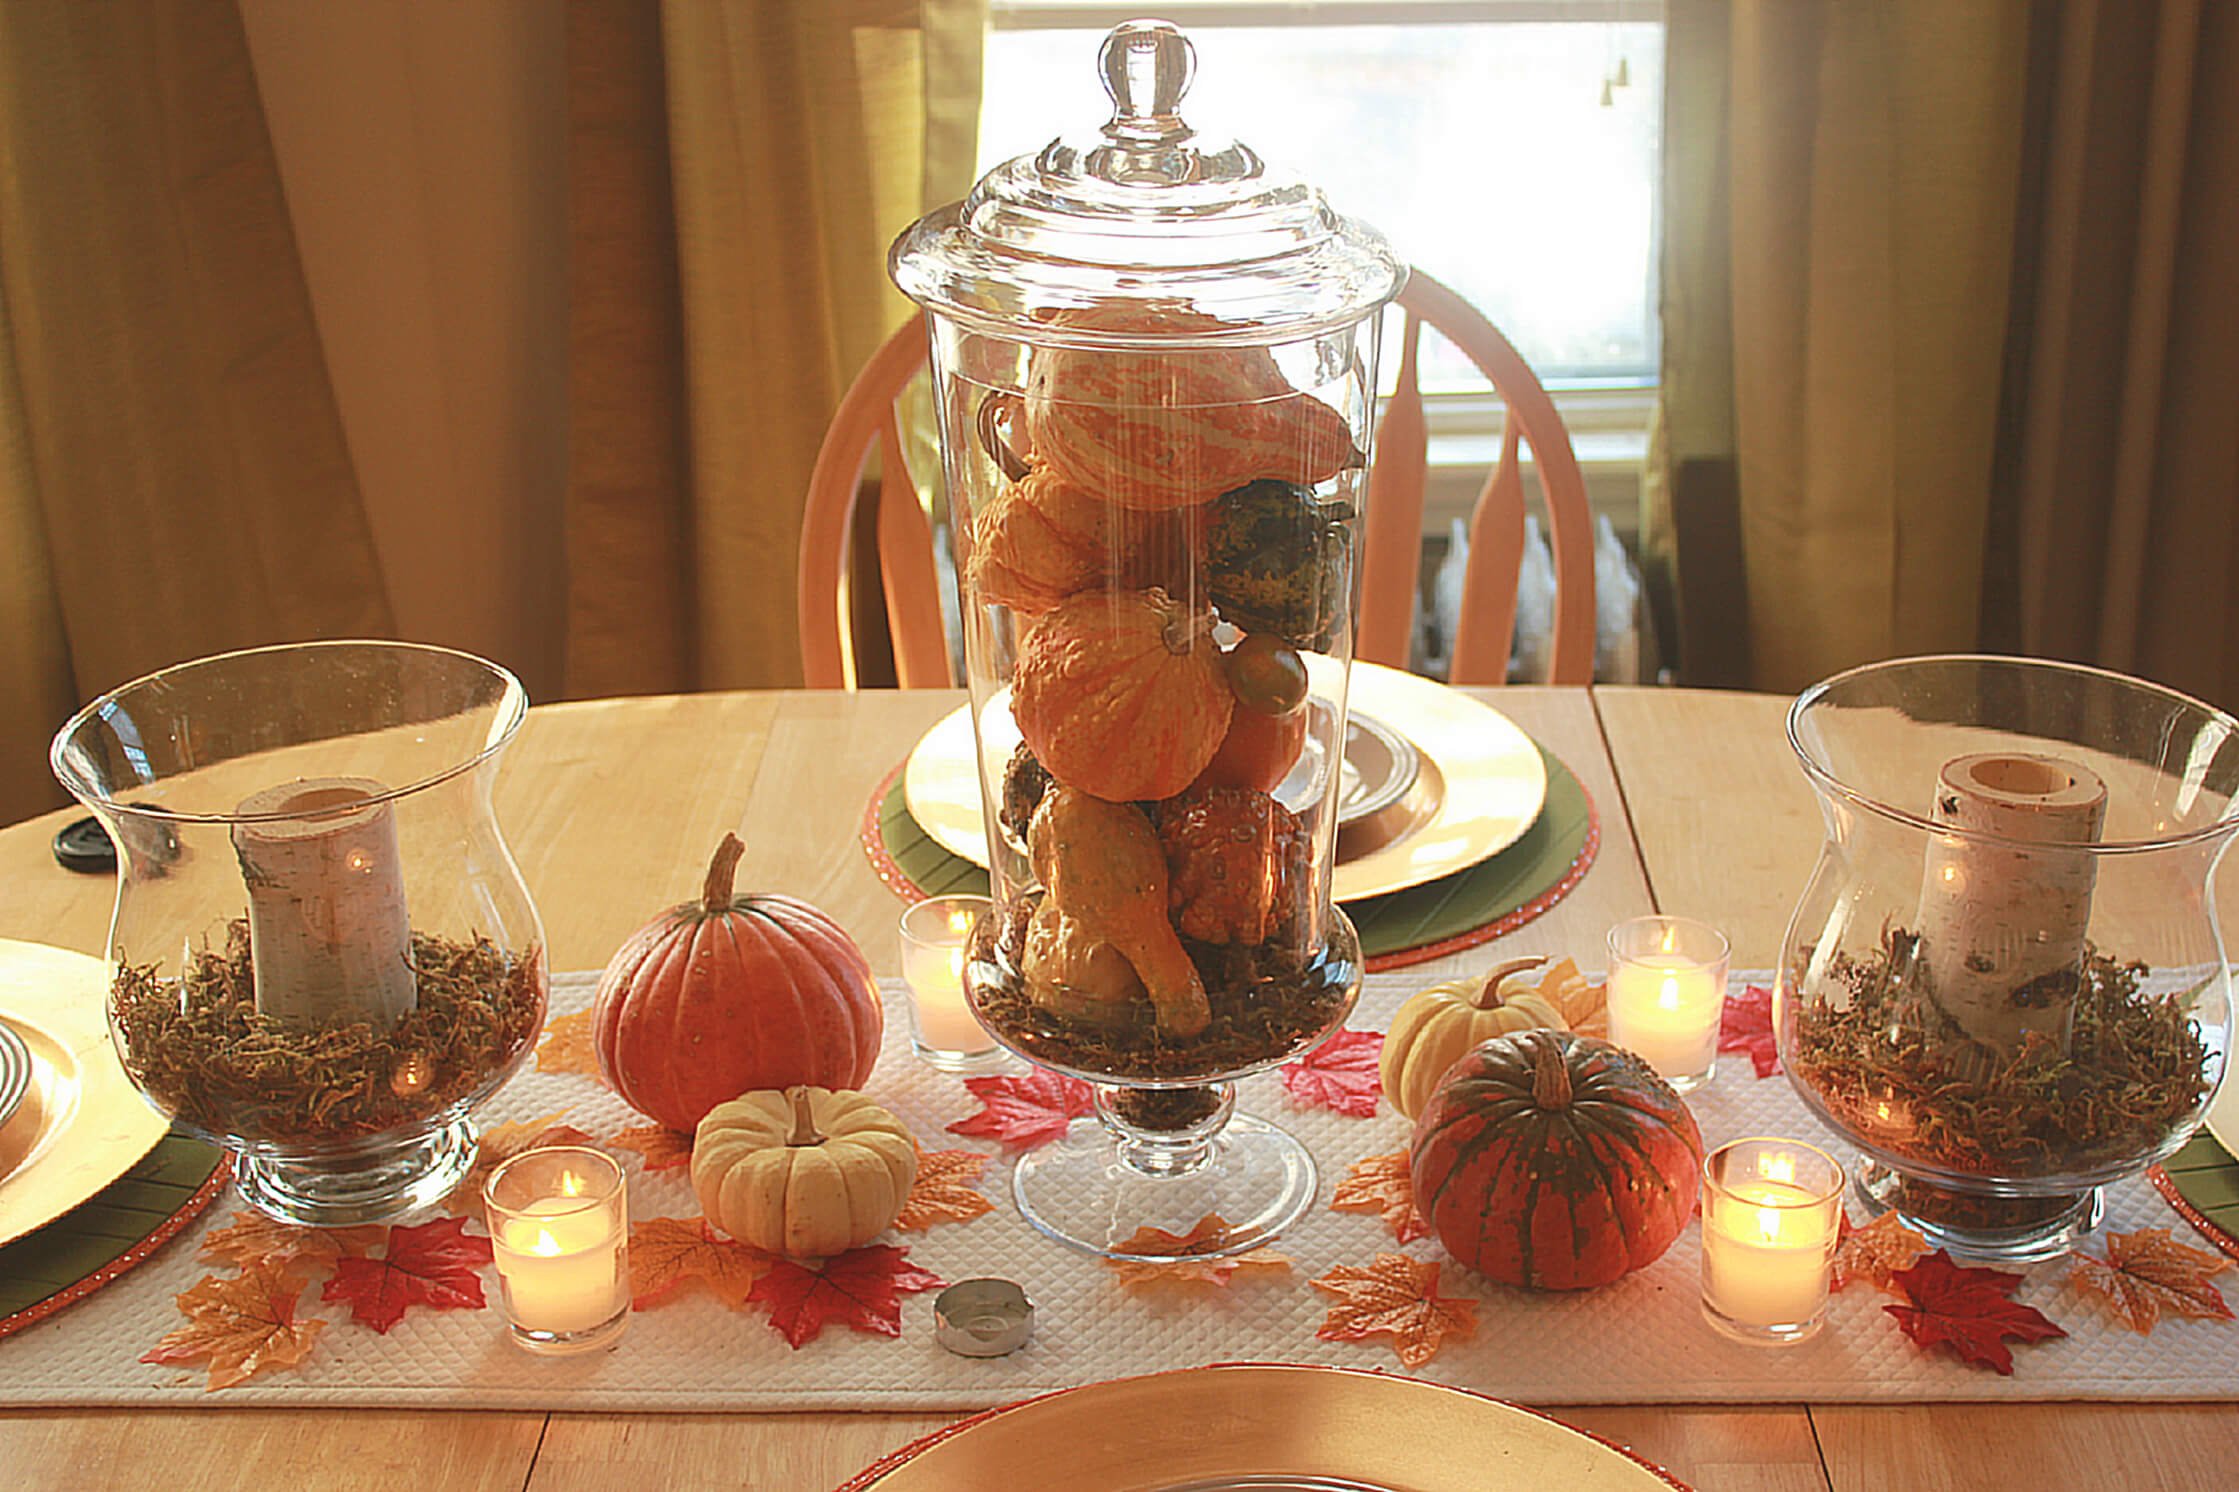 12 Rustic-Chic Thanksgiving Decorations Ideas